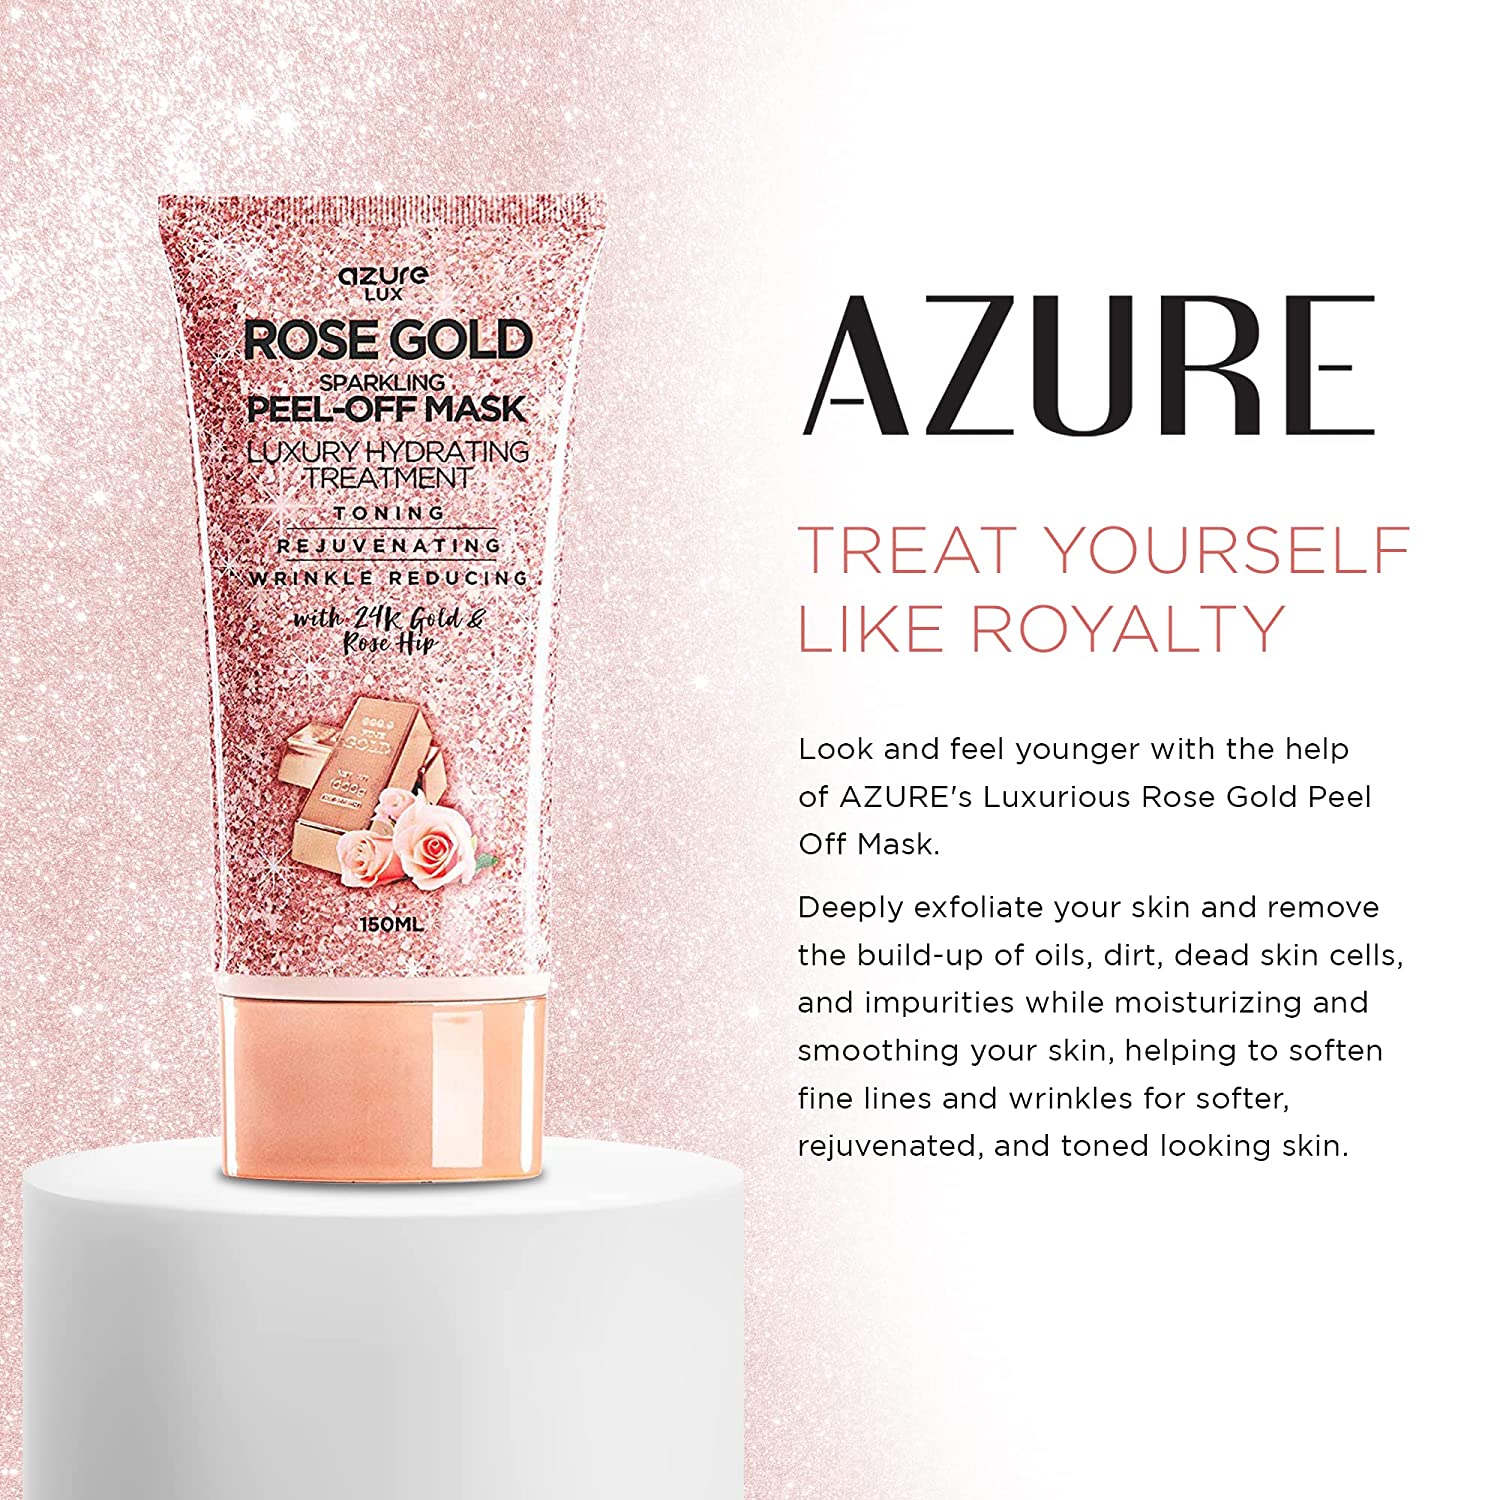 AZURE Rose Gold Hydrating Peel Off Face Mask- Anti Aging, Toning & Rejuvenating - Removes Blackheads, Dirt & Oils - With 24K Gold and Rose Hip Oil - Skin Care Made in Korea - 150mL / 5.07 fl.oz. - image 4 of 6